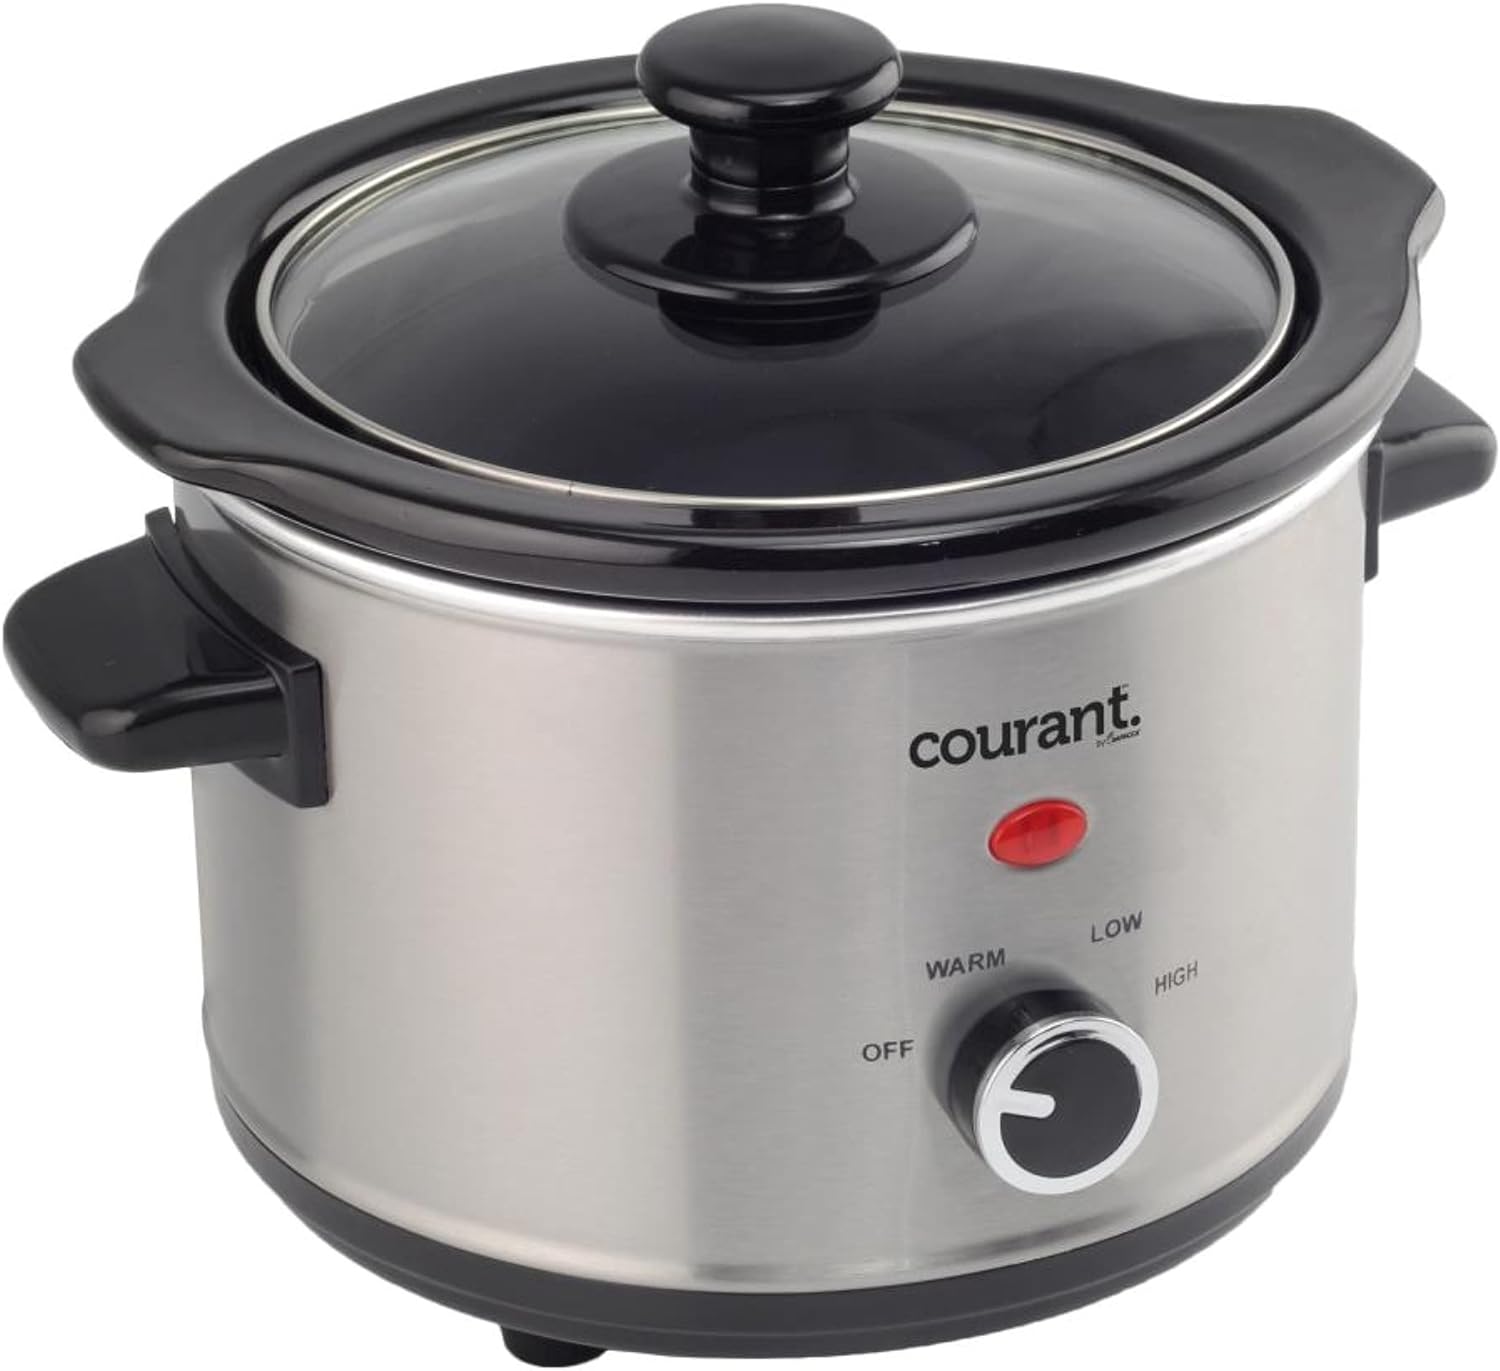 Courant Mini Slow Cooker Crock, with Easy Options 1.6 Quart Dishwasher Safe Pot, Stainless Steel